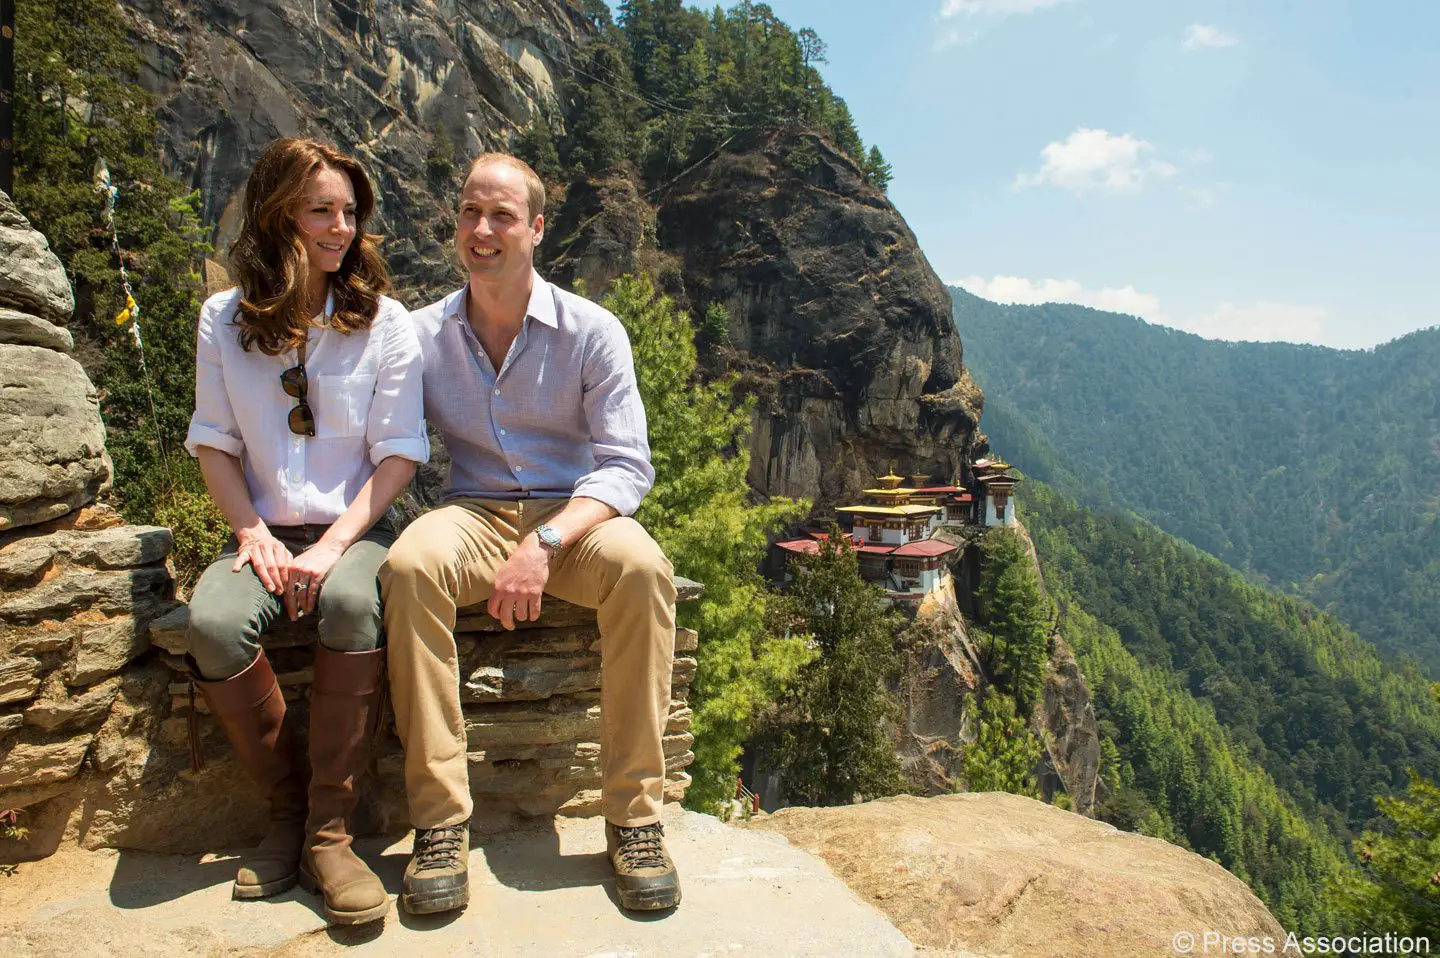 The Duke and Duchess of Cambridge at the Tiger’s Nest monastery during Bhutan visit